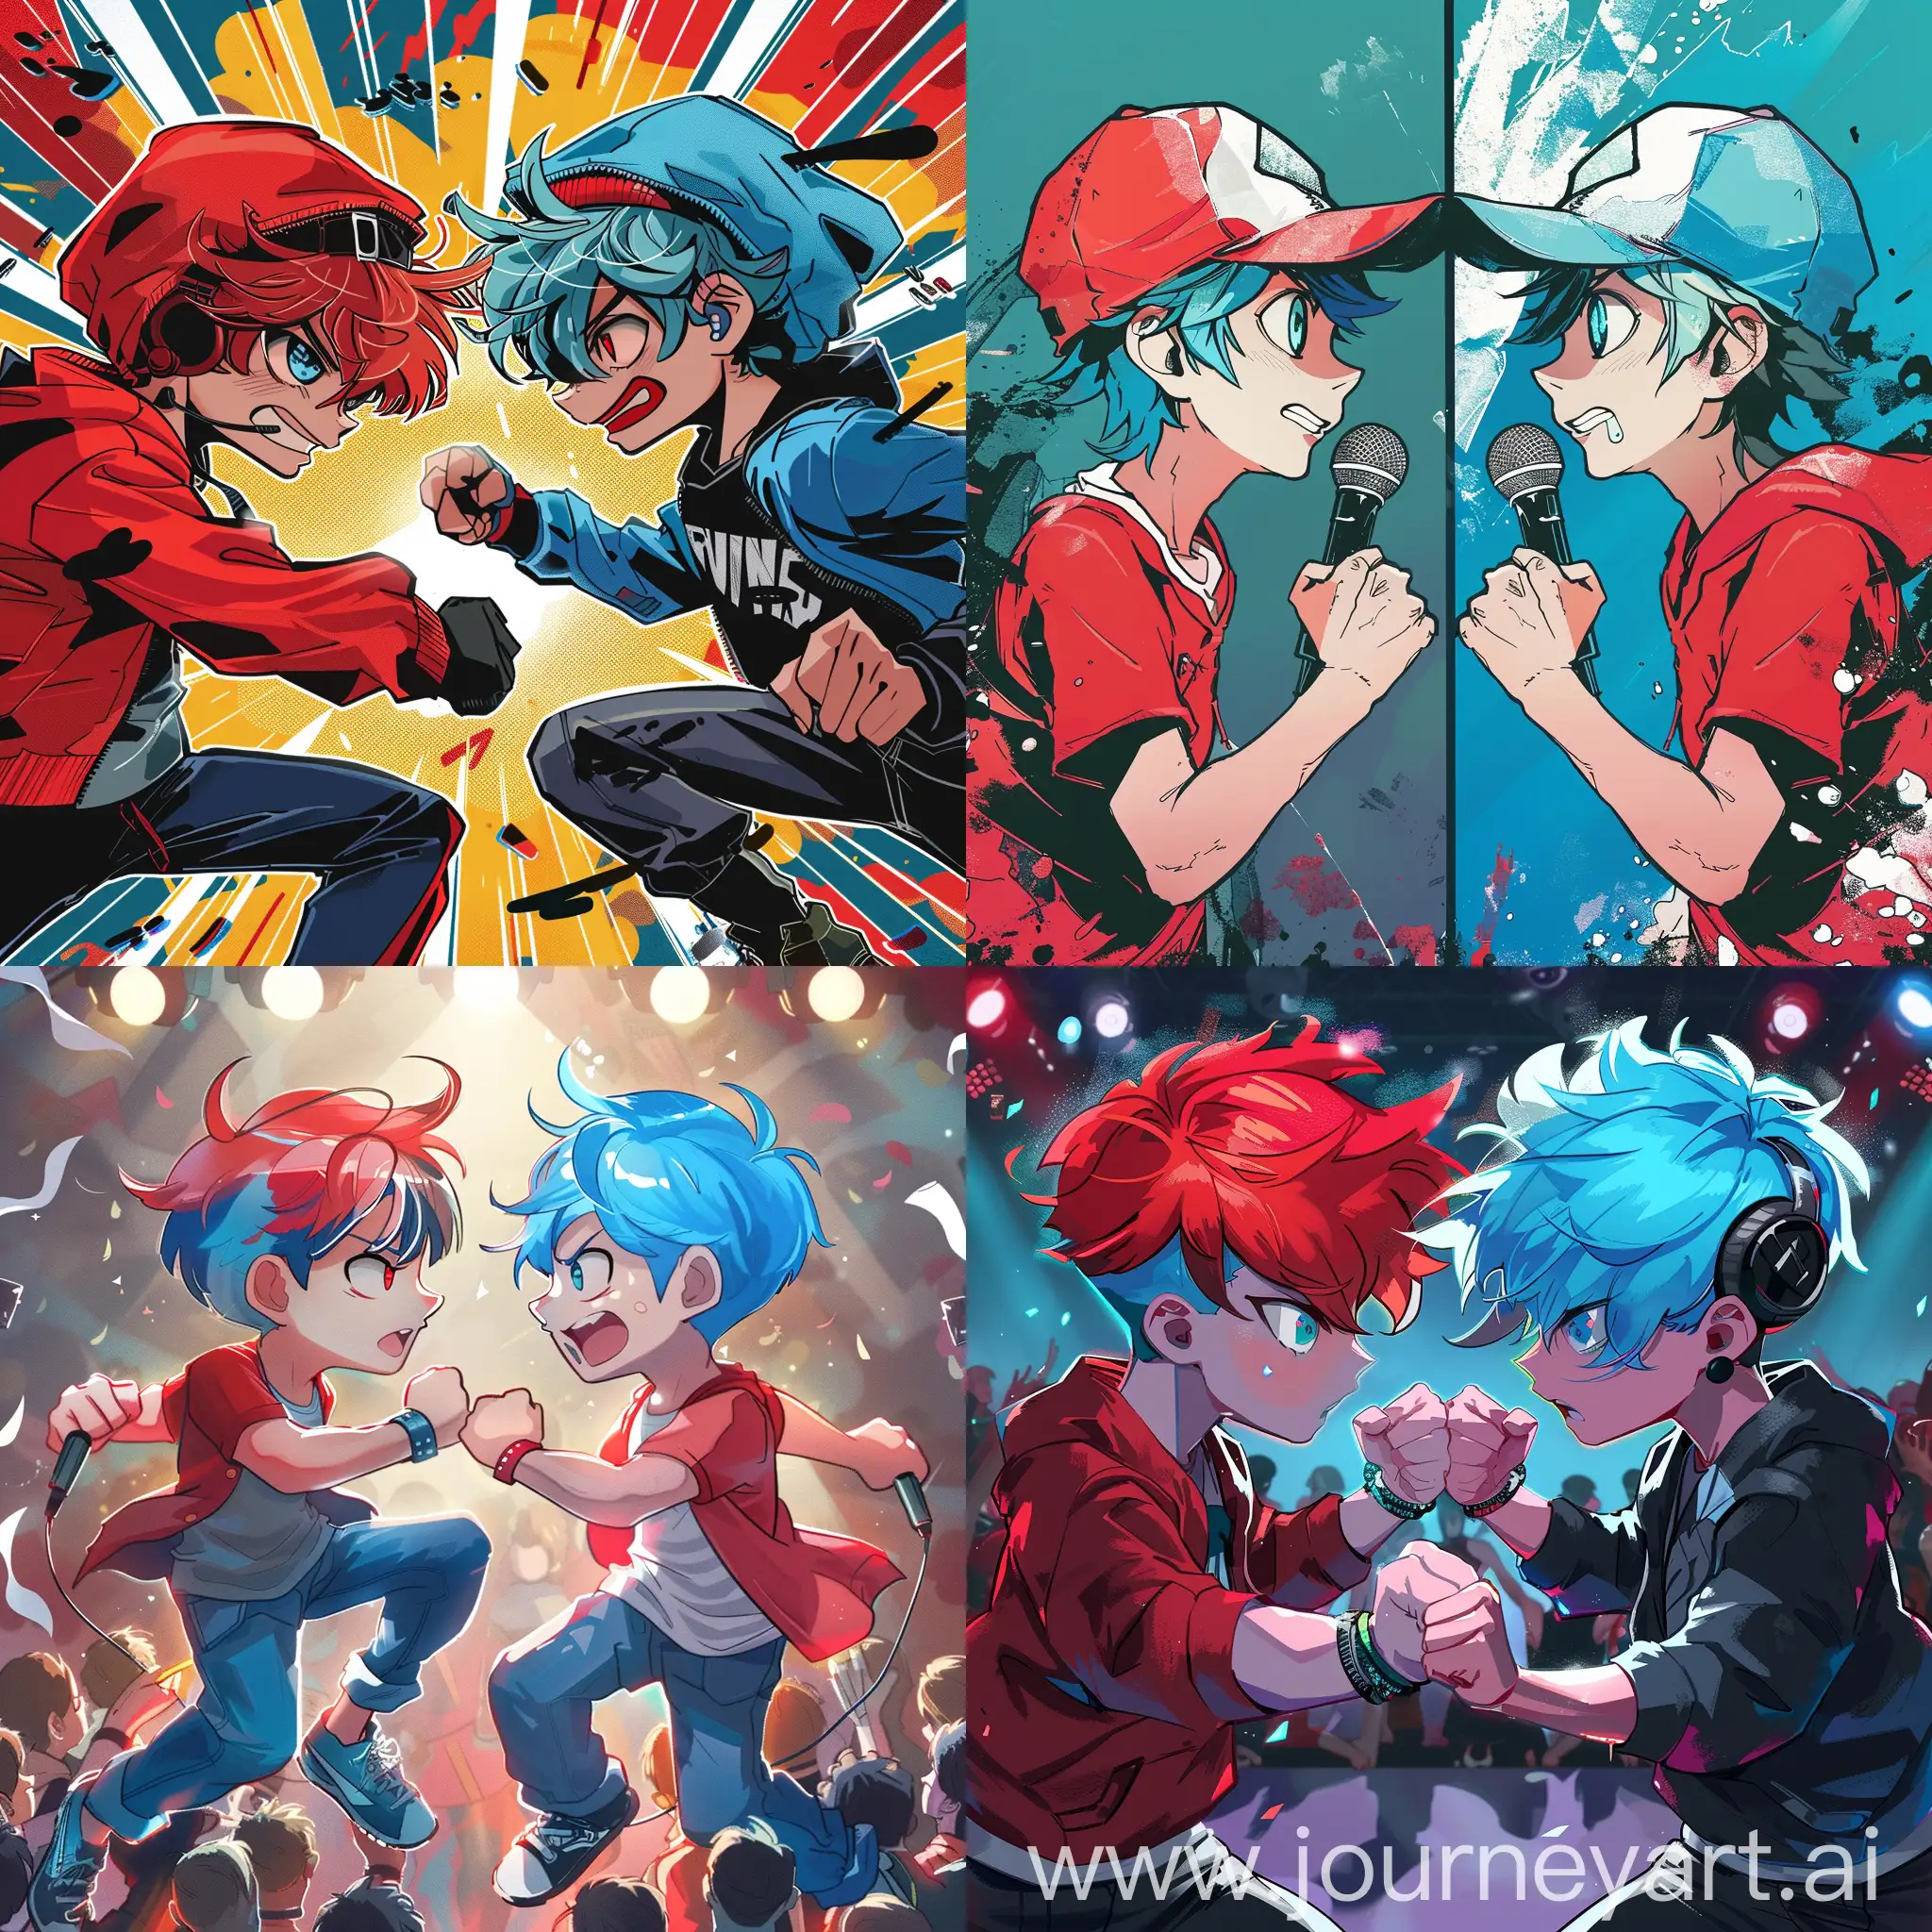 the cover for the track where two boy characters red and blue compete in a friendship duet, which arose due to a quarrel between the characters with the atmosphere of Friday night funkin